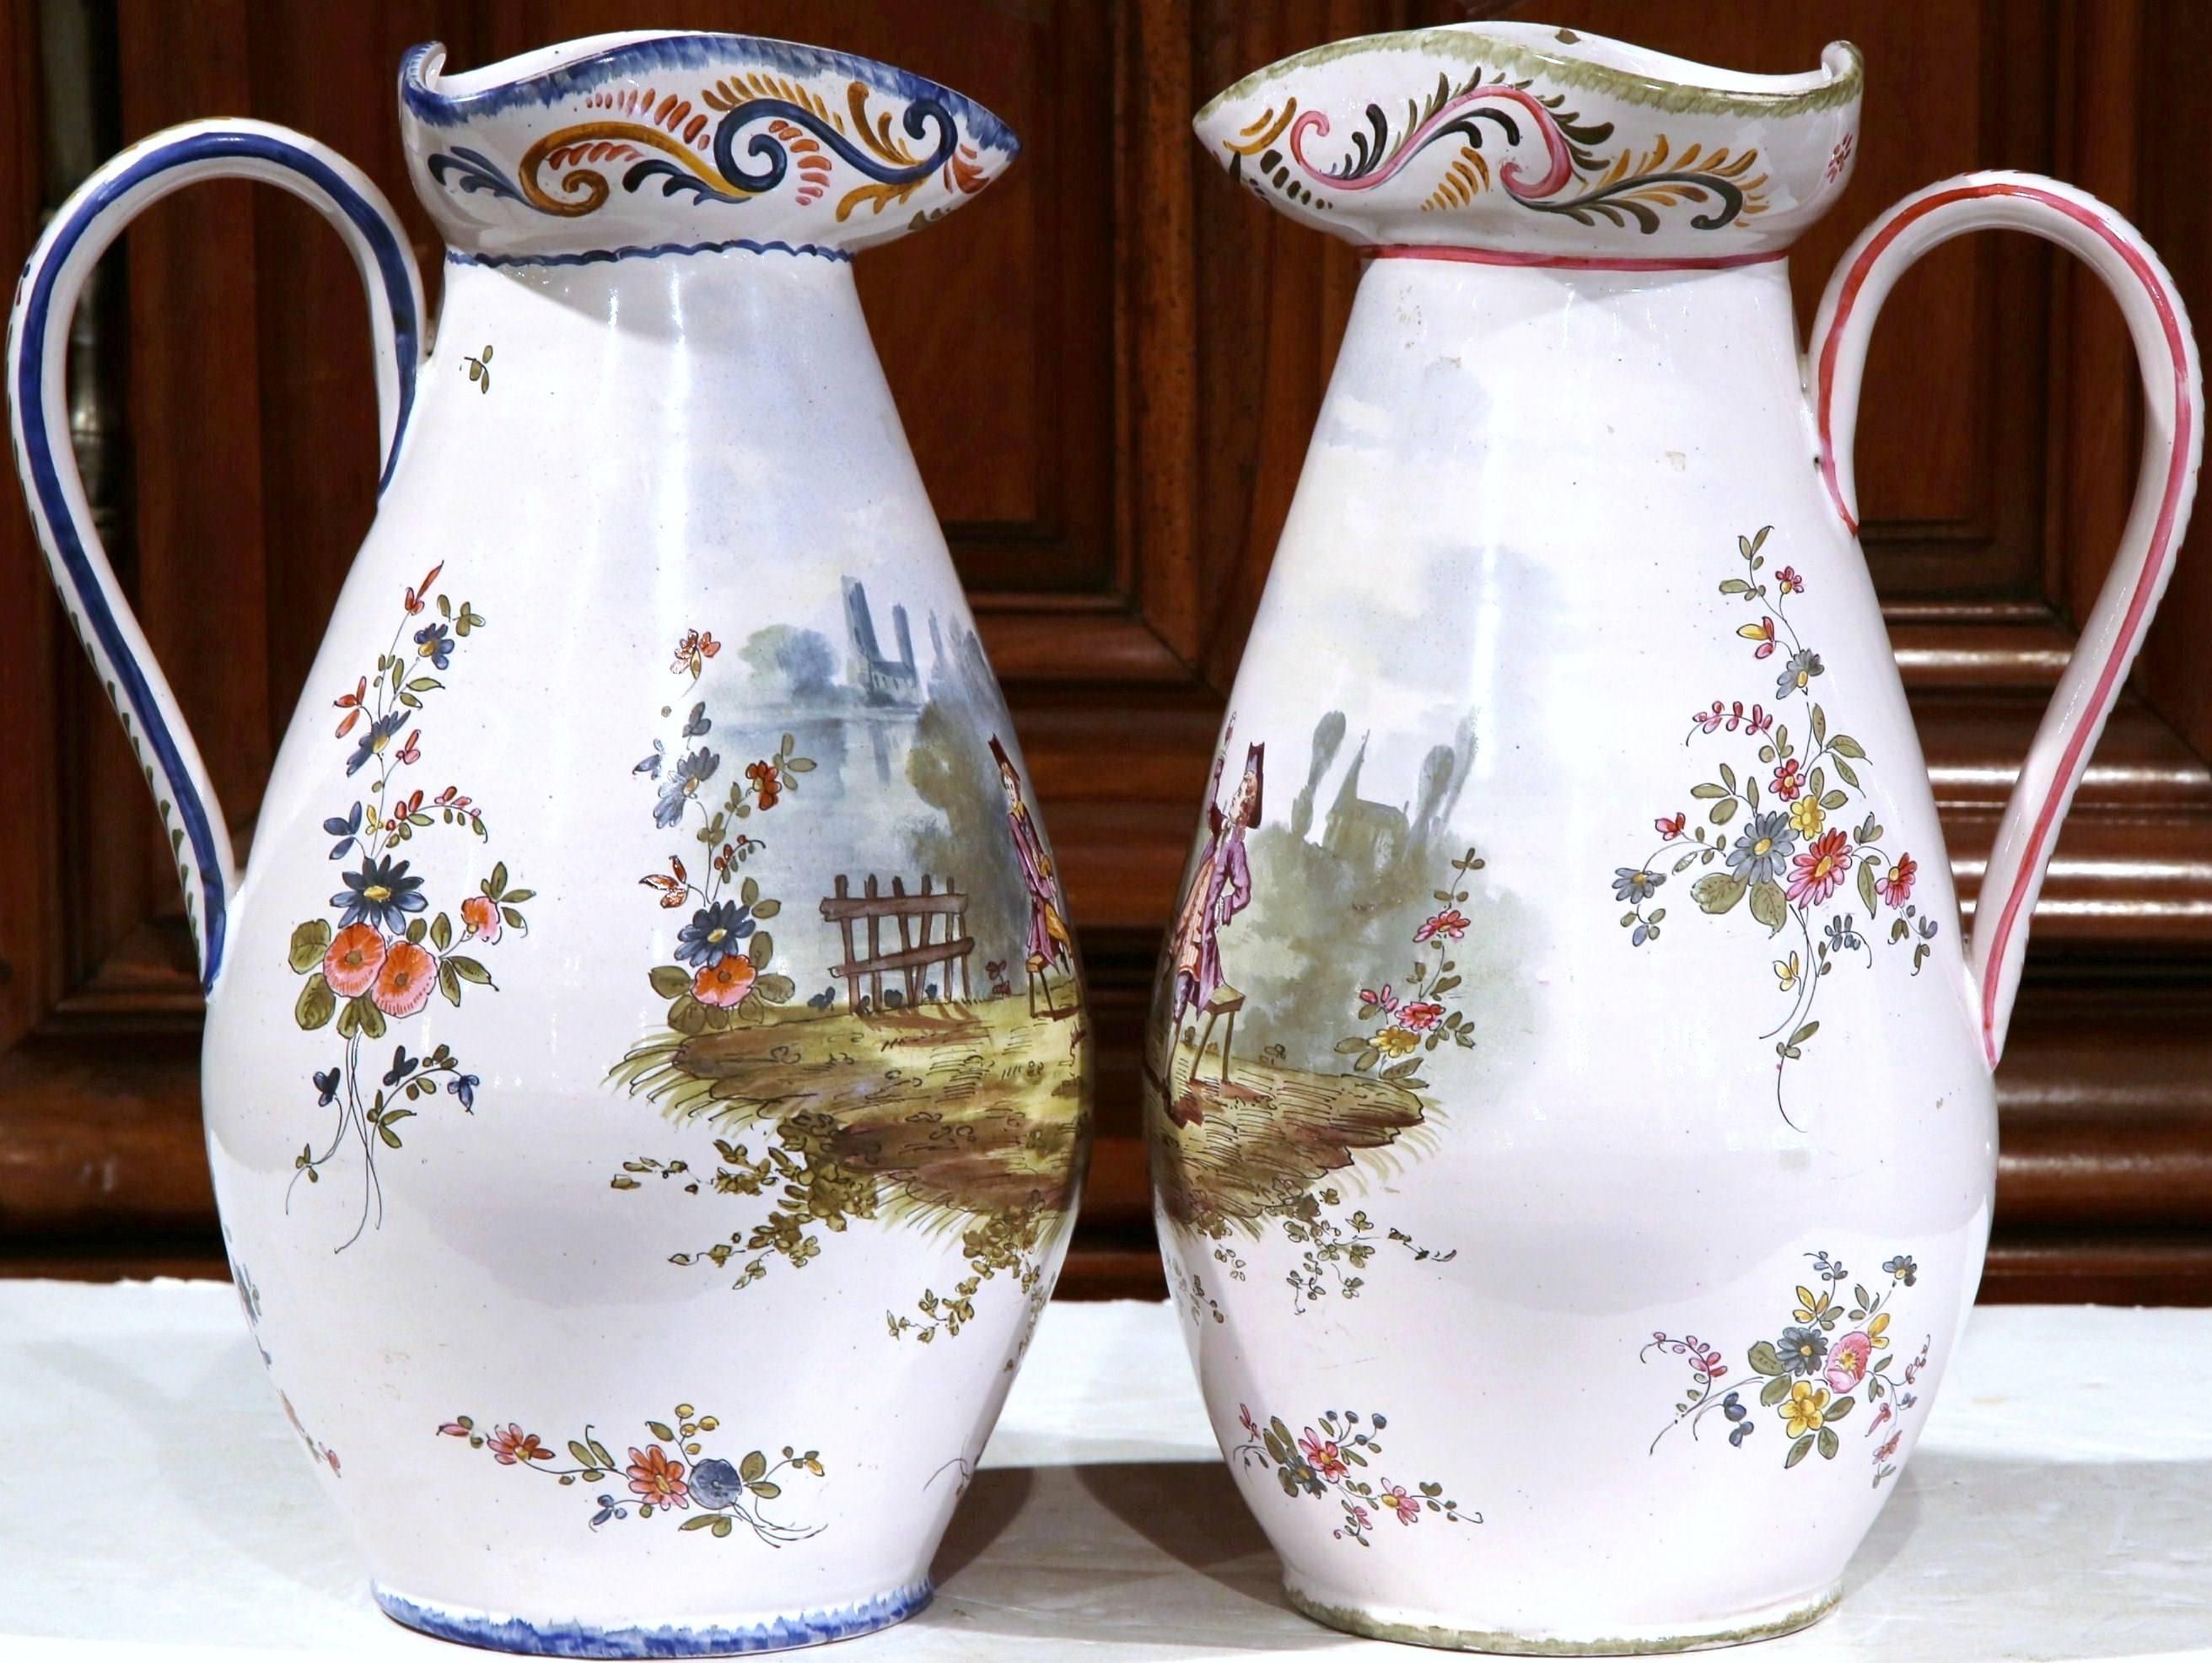 Ceramic Pair of 19th Century, French, Painted Faience Wine Pitchers with Tavern Scenes